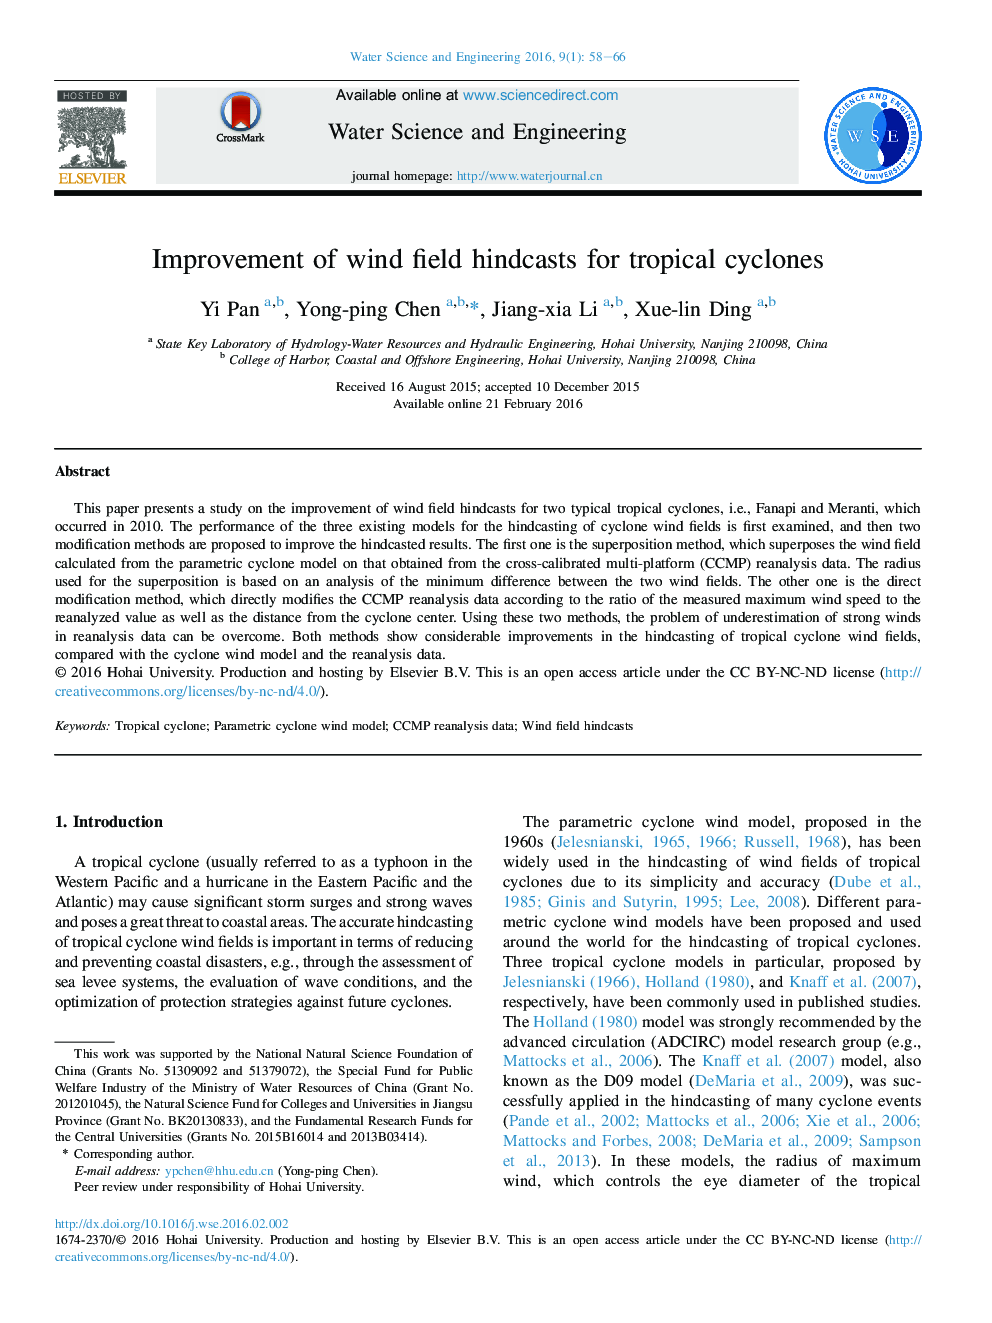 Improvement of wind field hindcasts for tropical cyclones 